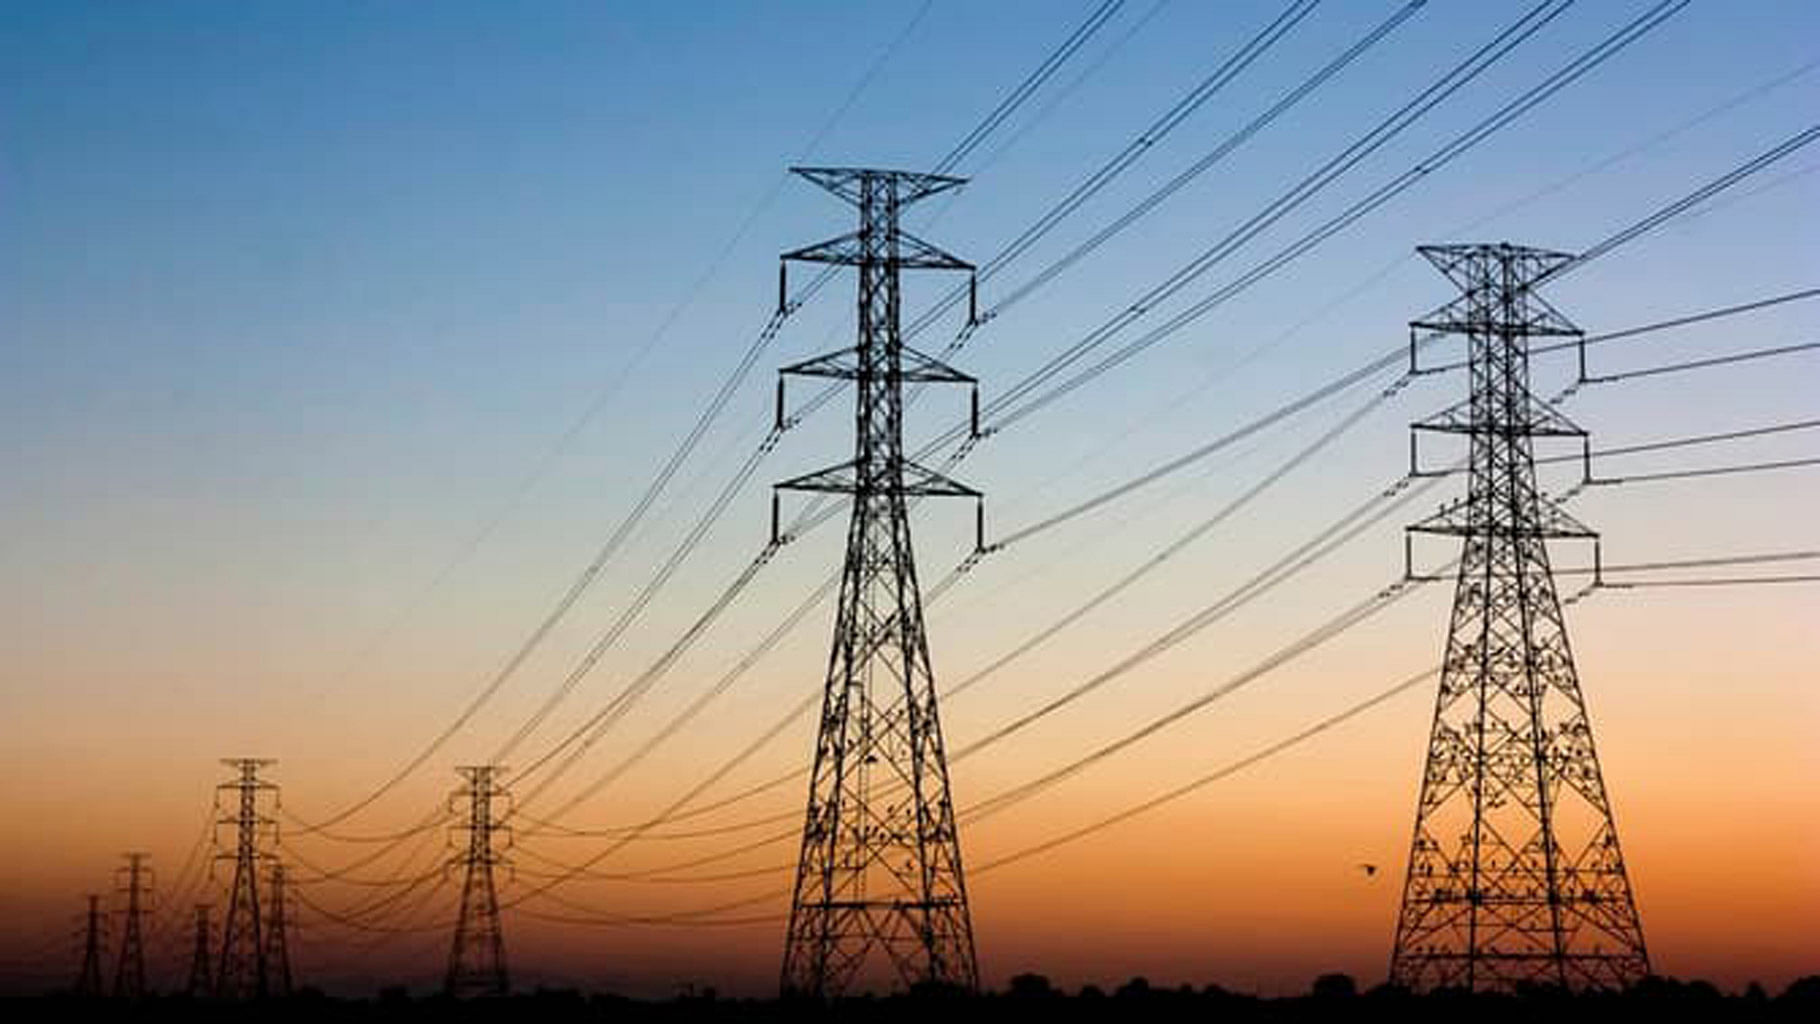 Reliance Infrastructure distributes power in Delhi via two subsidiaries, BSES Yamuna Power and BSES Rajdhani Power. (Photo: iStockphoto)